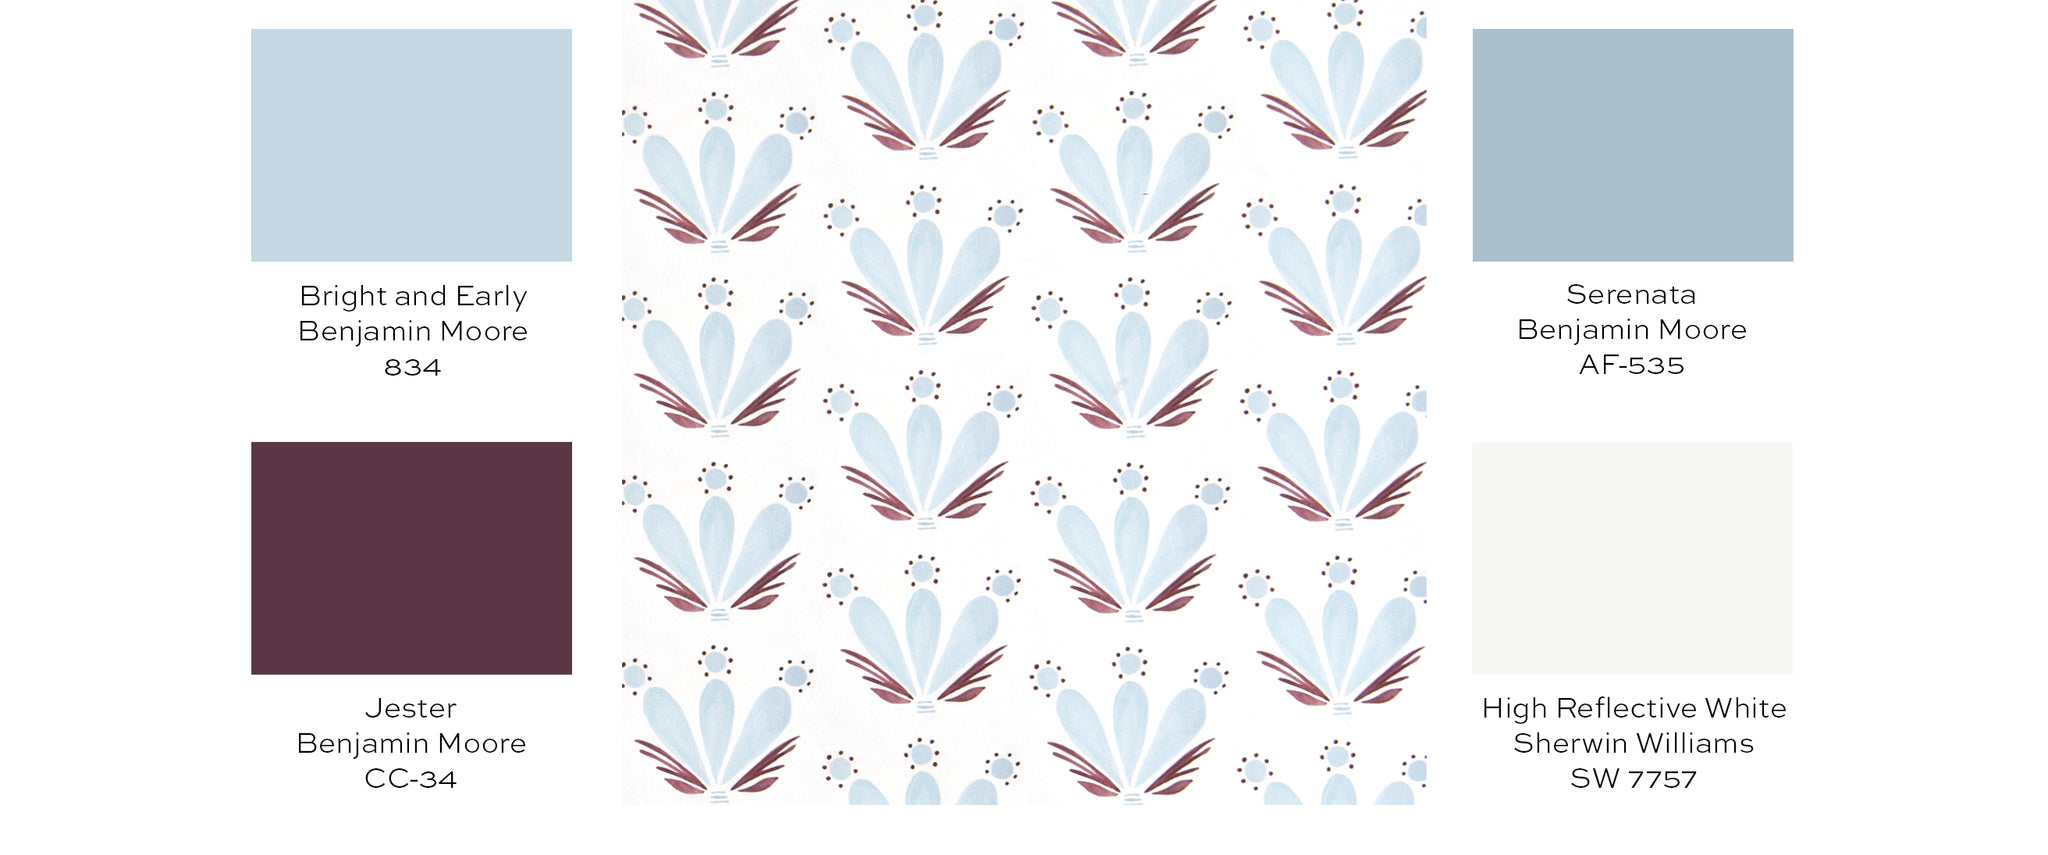 Paint guide for blue and burgundy drop repeat floral wallpaper